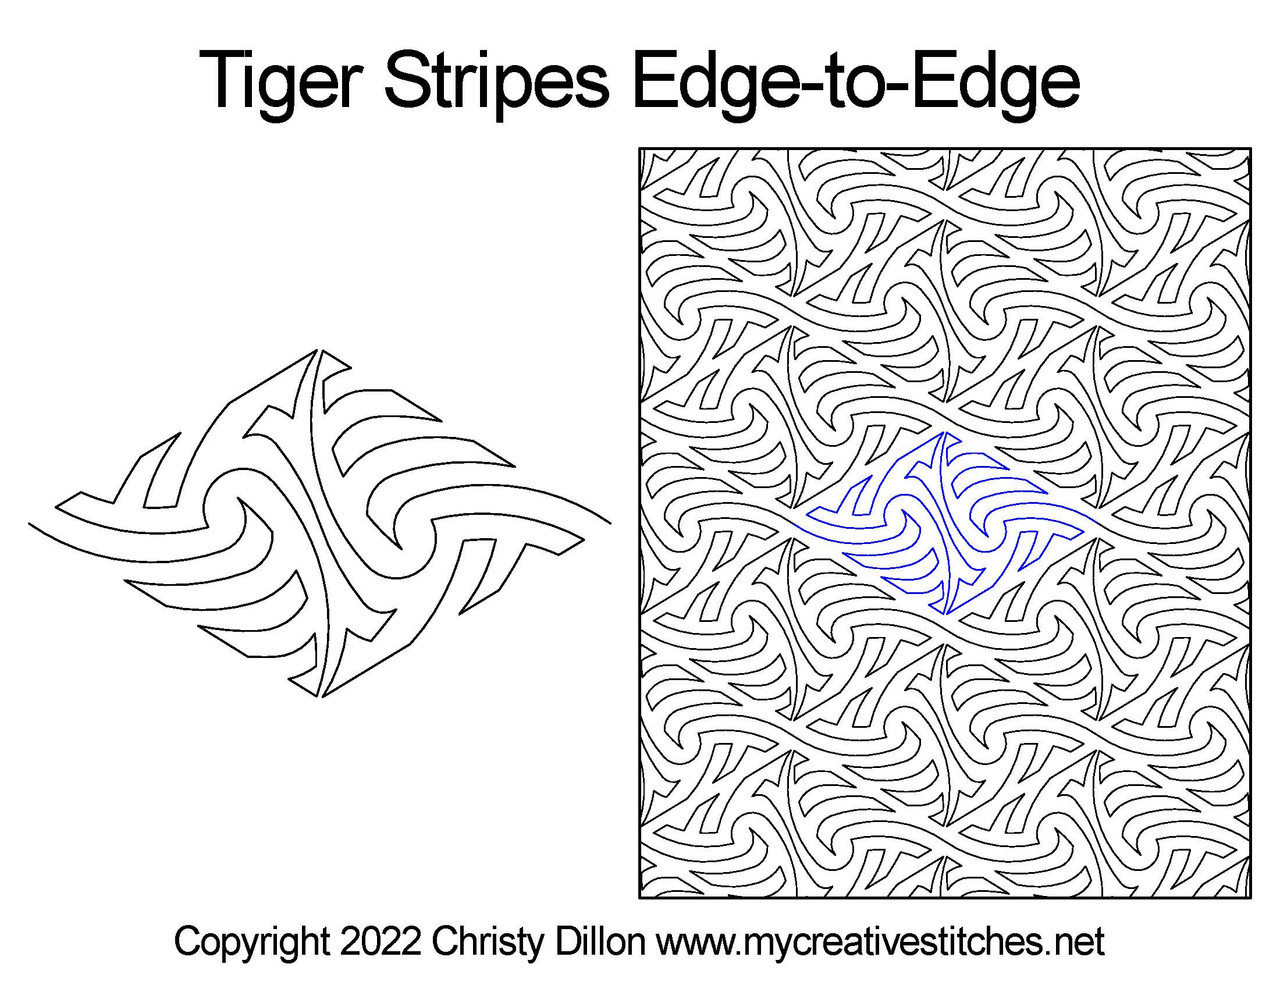 Straight Line Stitching 12 Lines Per 1 Tiger Tape | Old Made Quilts  #TT-1412